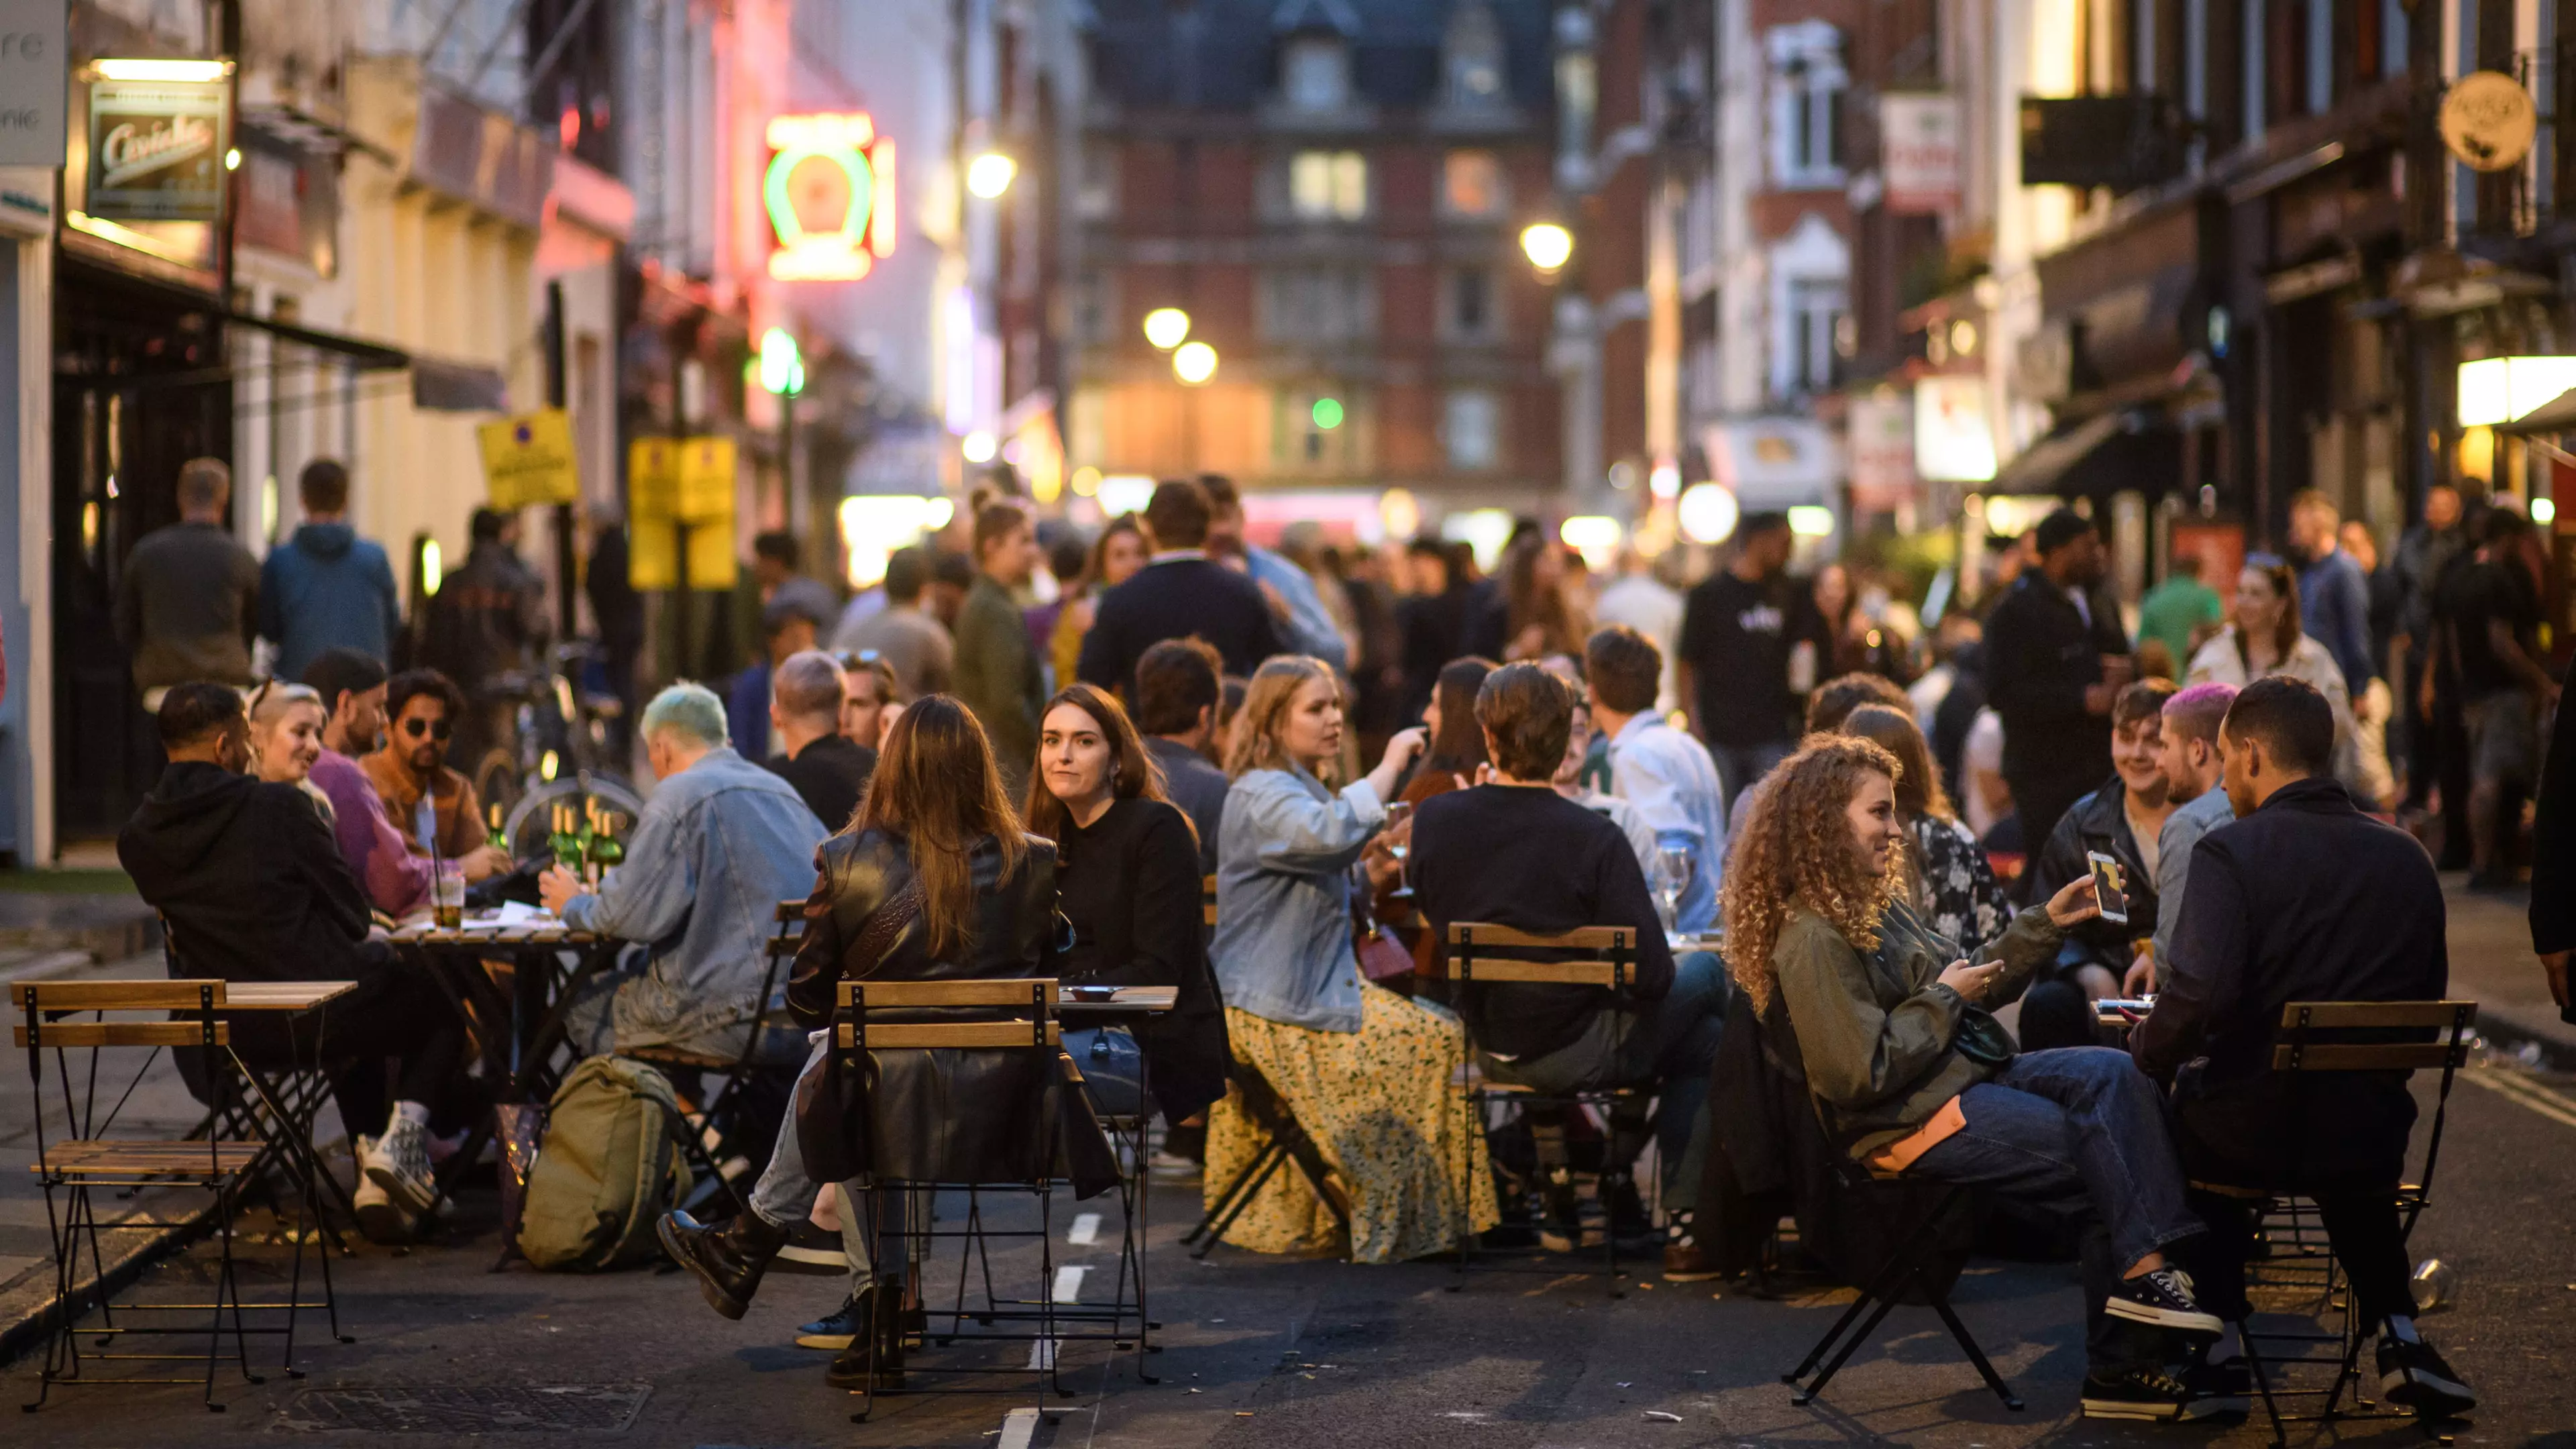 Pubs, Bars And Restaurants In England Will Have 10pm Curfew From Thursday